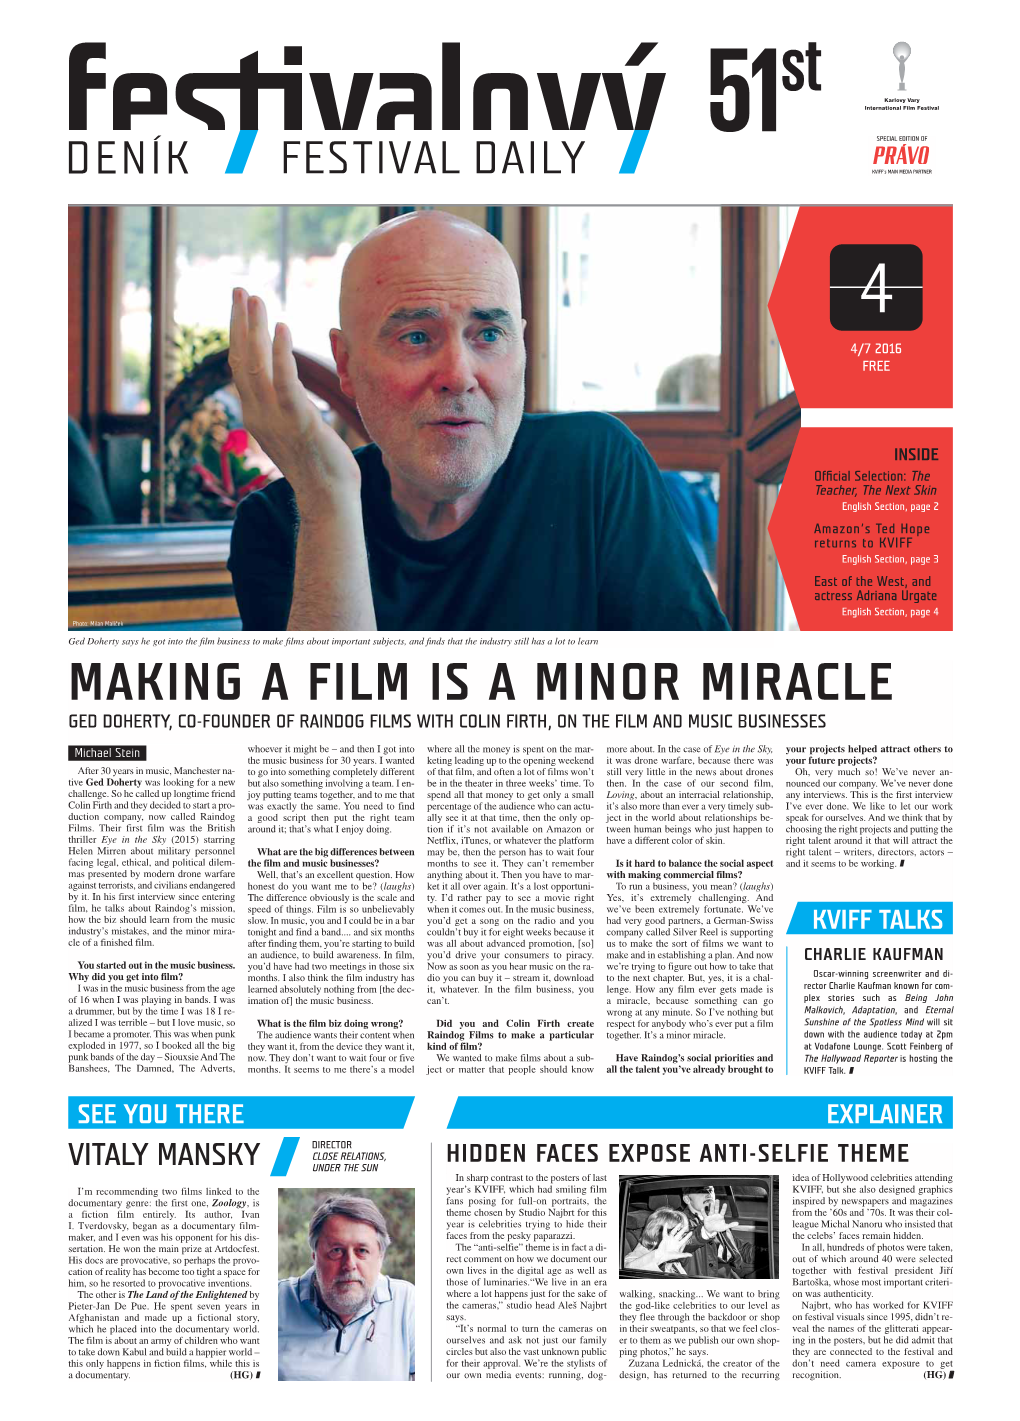 Making a Film Is a Minor Miracle Ged Doherty, Co-Founder of Raindog Films with Colin Firth, on the Film and Music Businesses